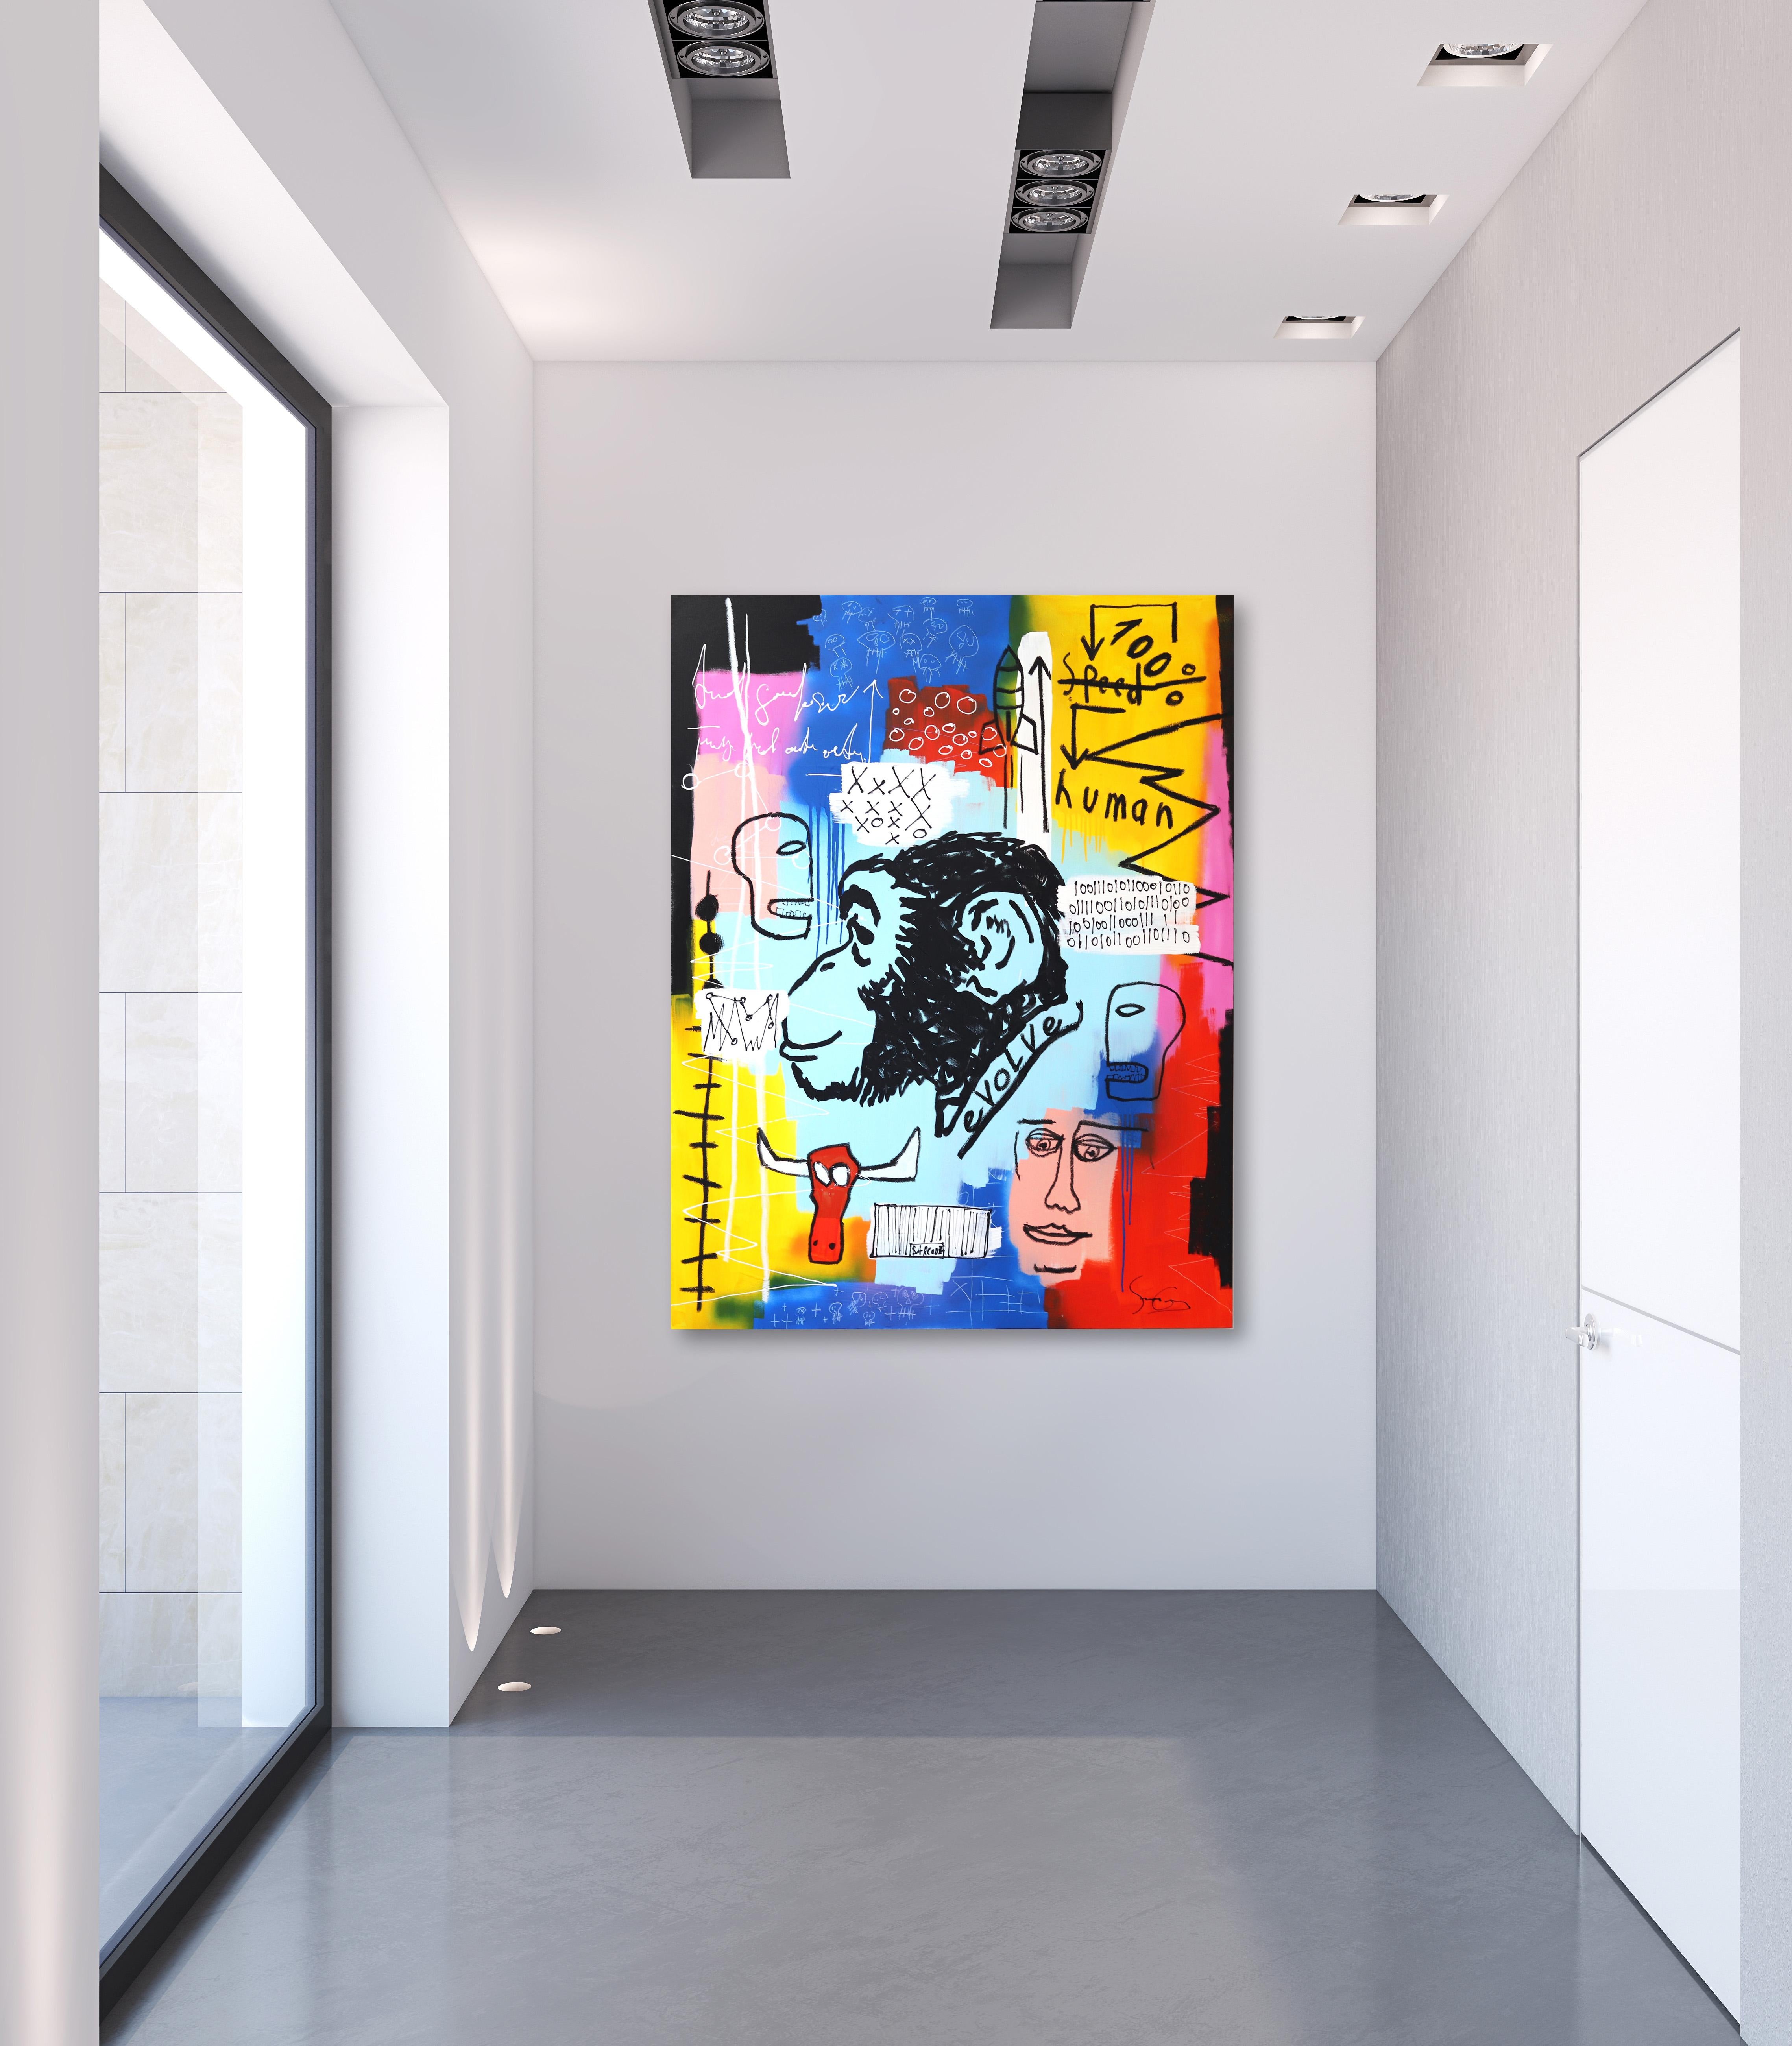 With cultural icons and world events acting as inspiration, artist Soren Grau strives to communicate meaning through figures and colors. He paints in a street art-inspired Neo-expressionist style inspired by artists such as Keith Haring and